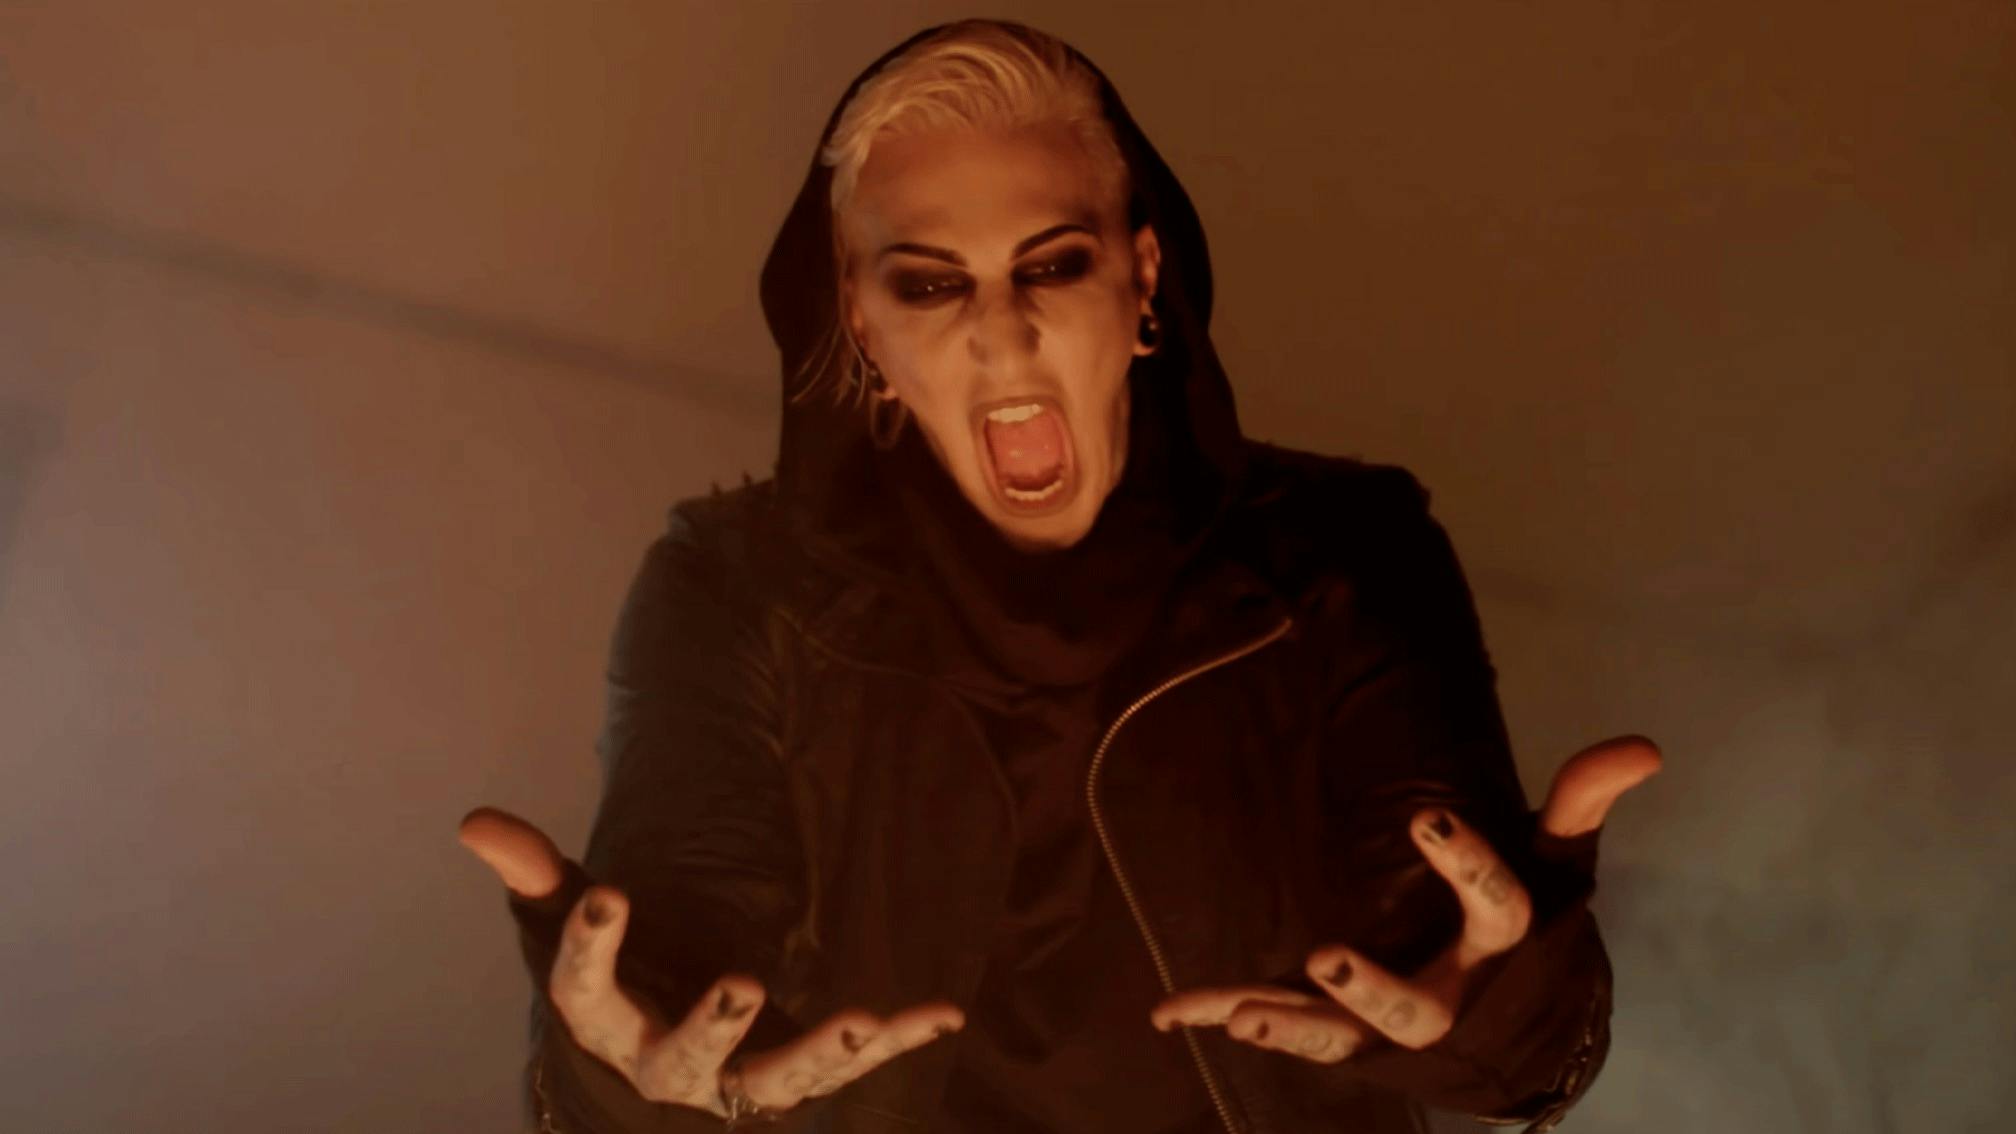 Motionless In White drop new single, Masterpiece